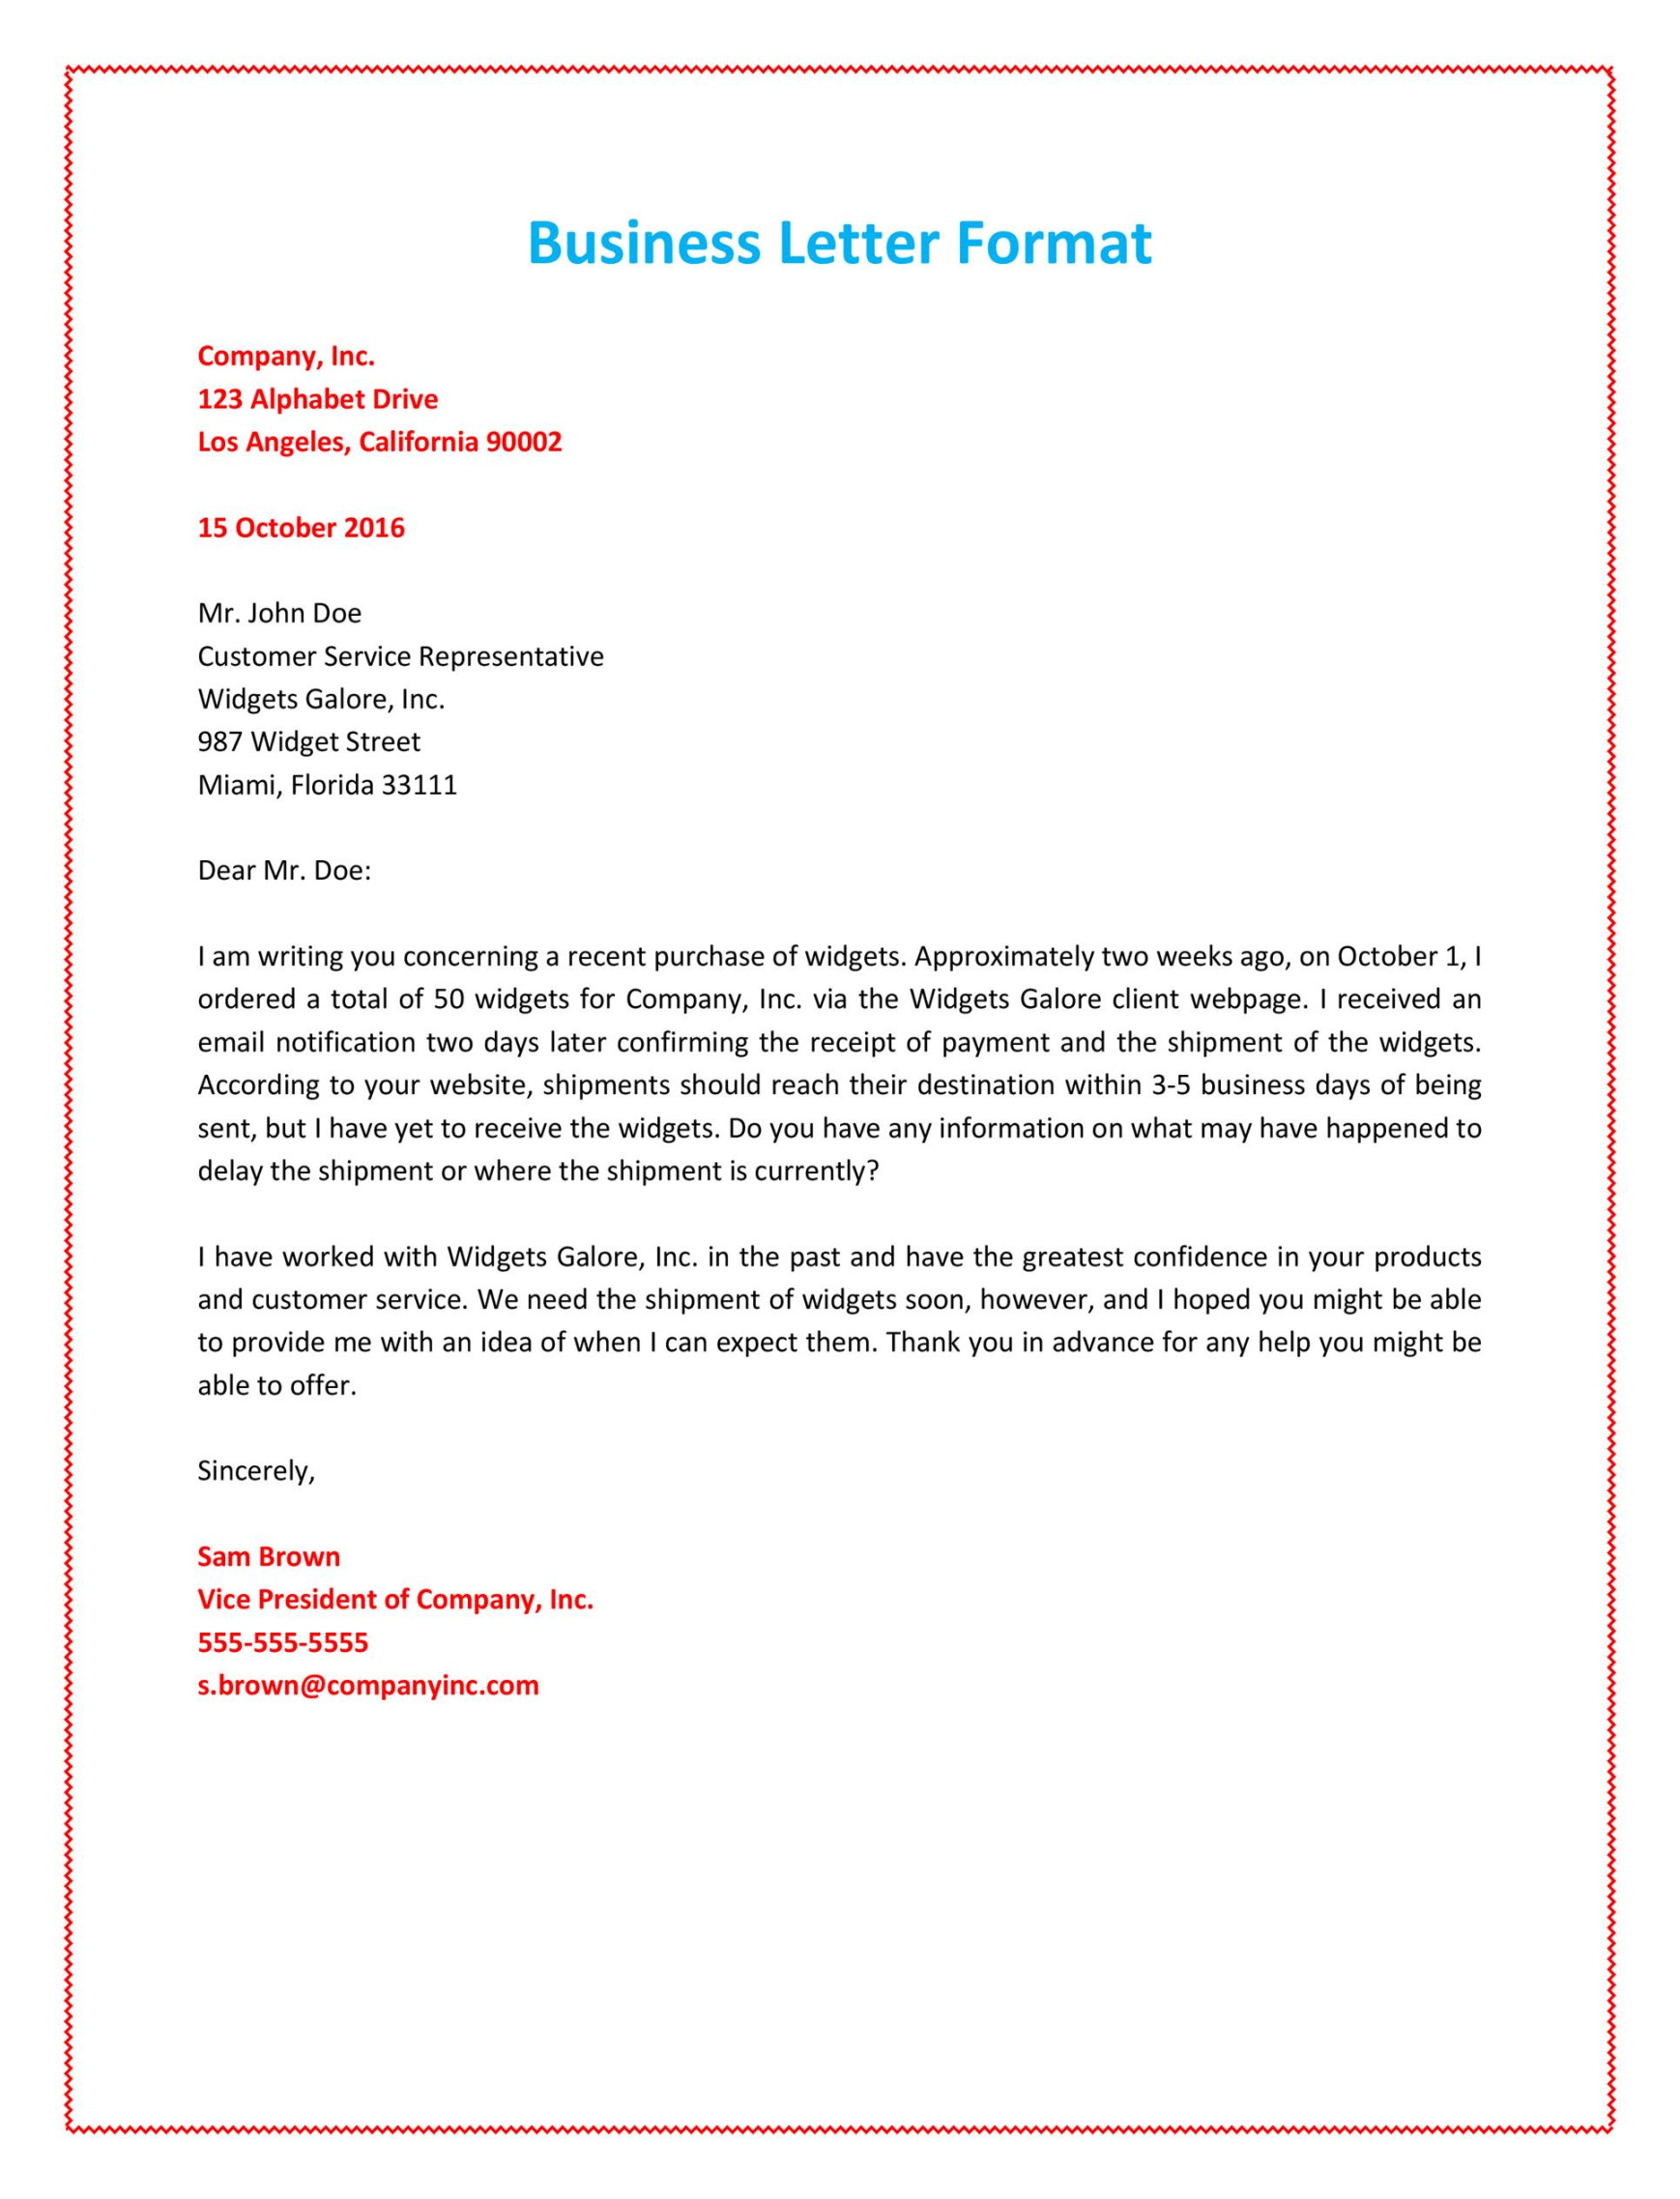 Formal / Business Letter Format Templates & Examples ᐅ TemplateLab